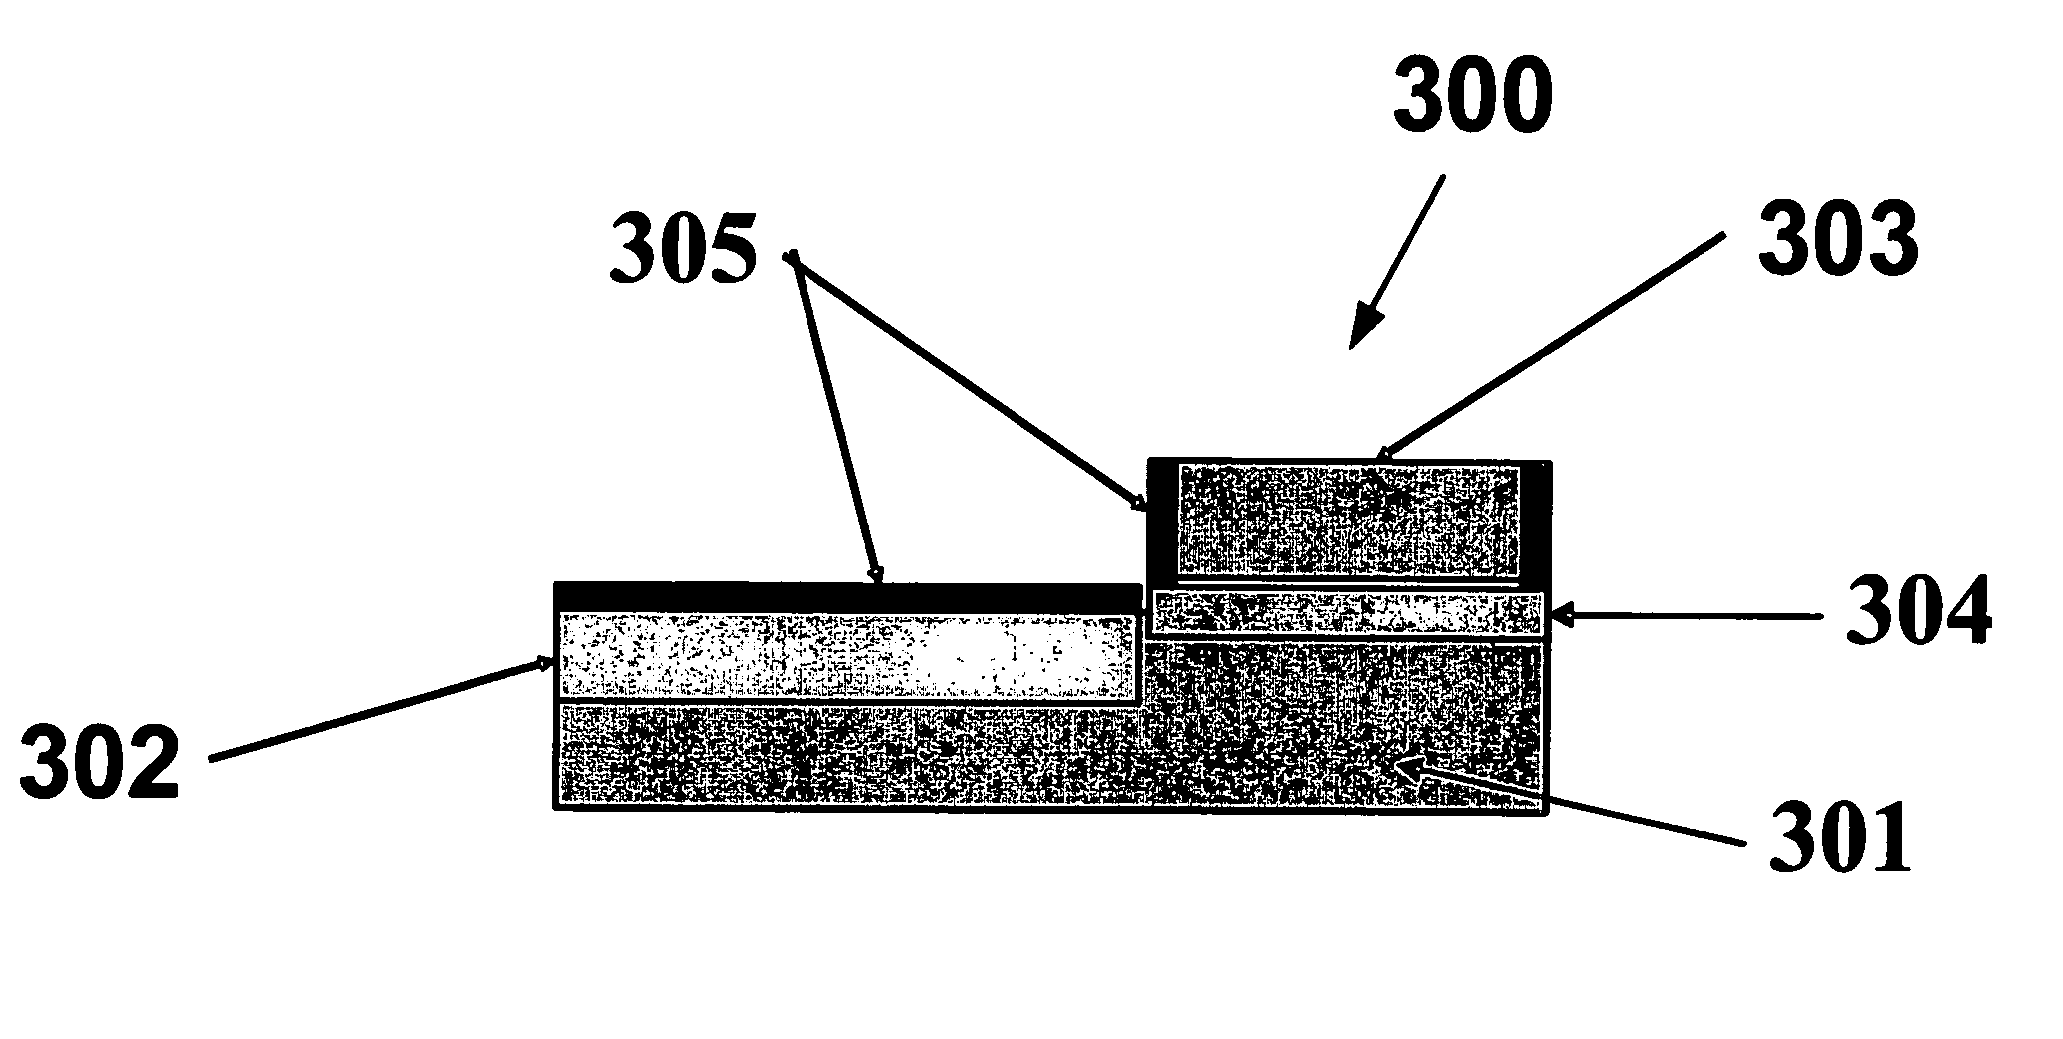 System and method for removal of photoresist in transistor fabrication for integrated circuit manufacturing